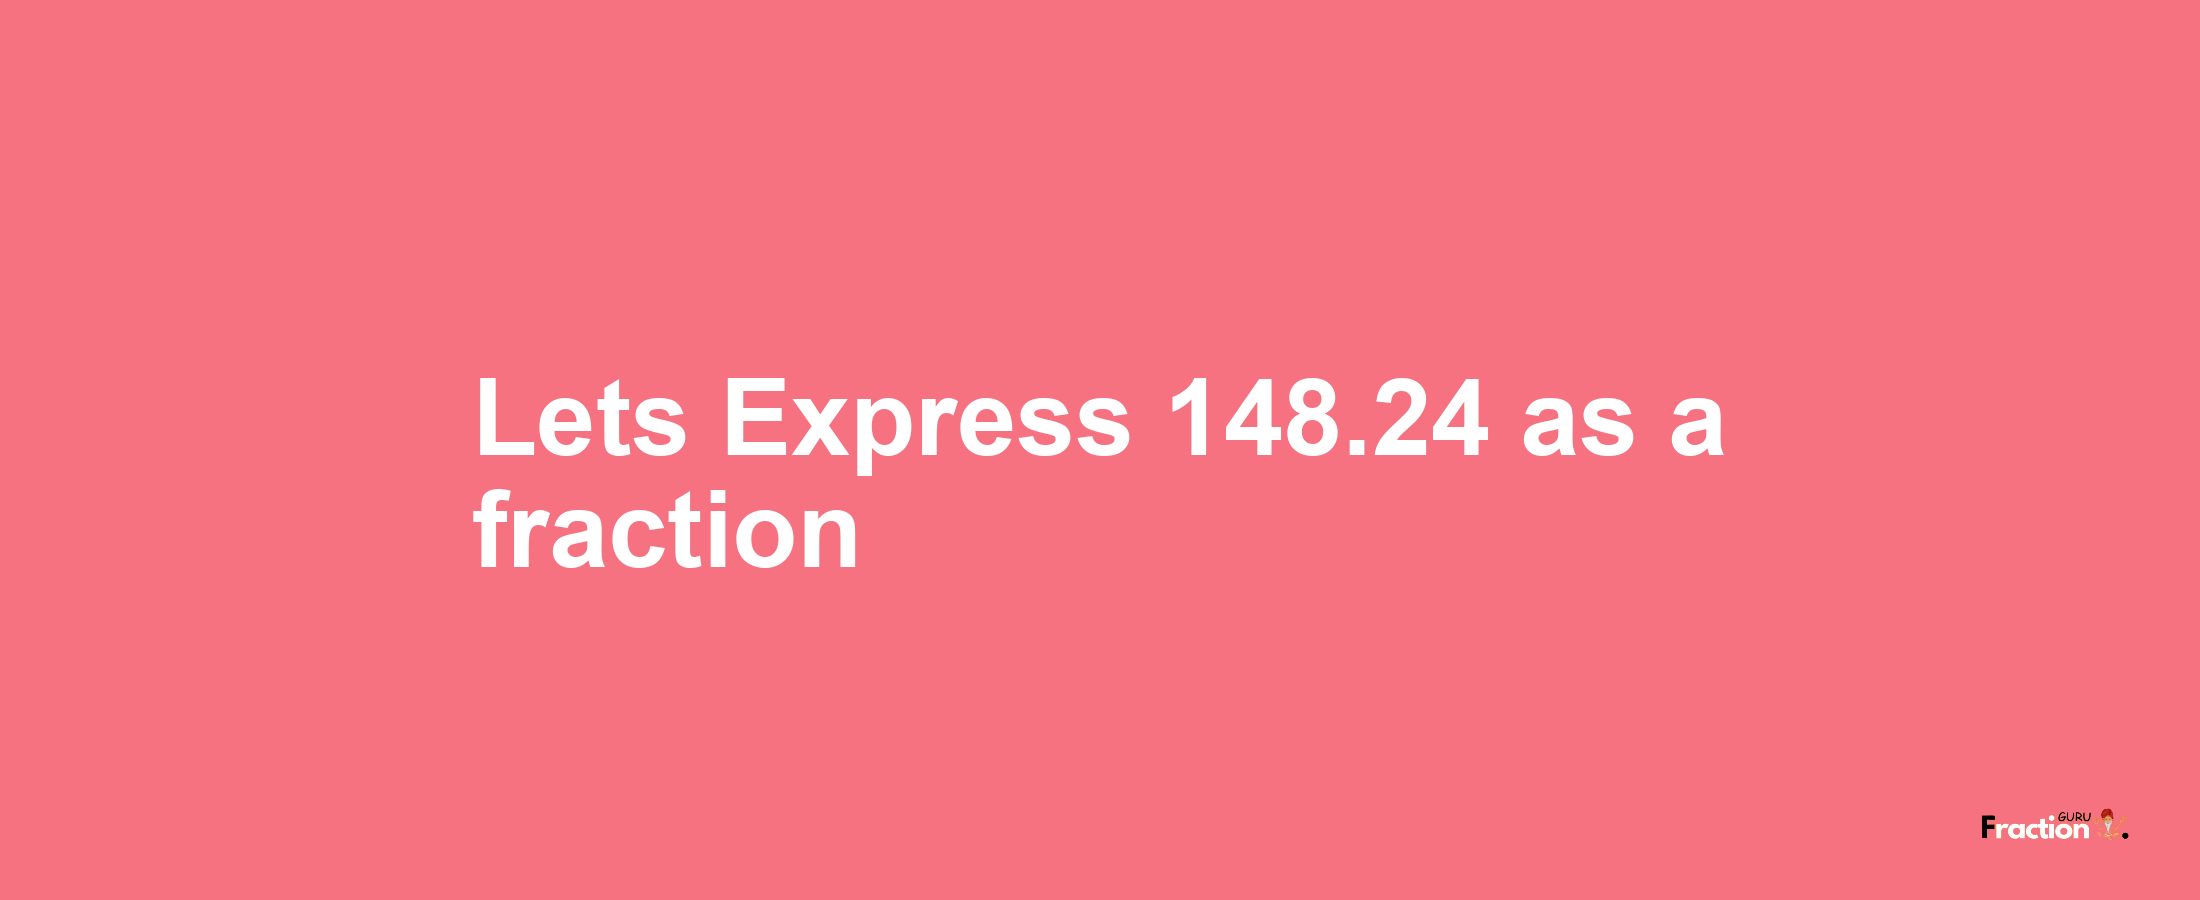 Lets Express 148.24 as afraction